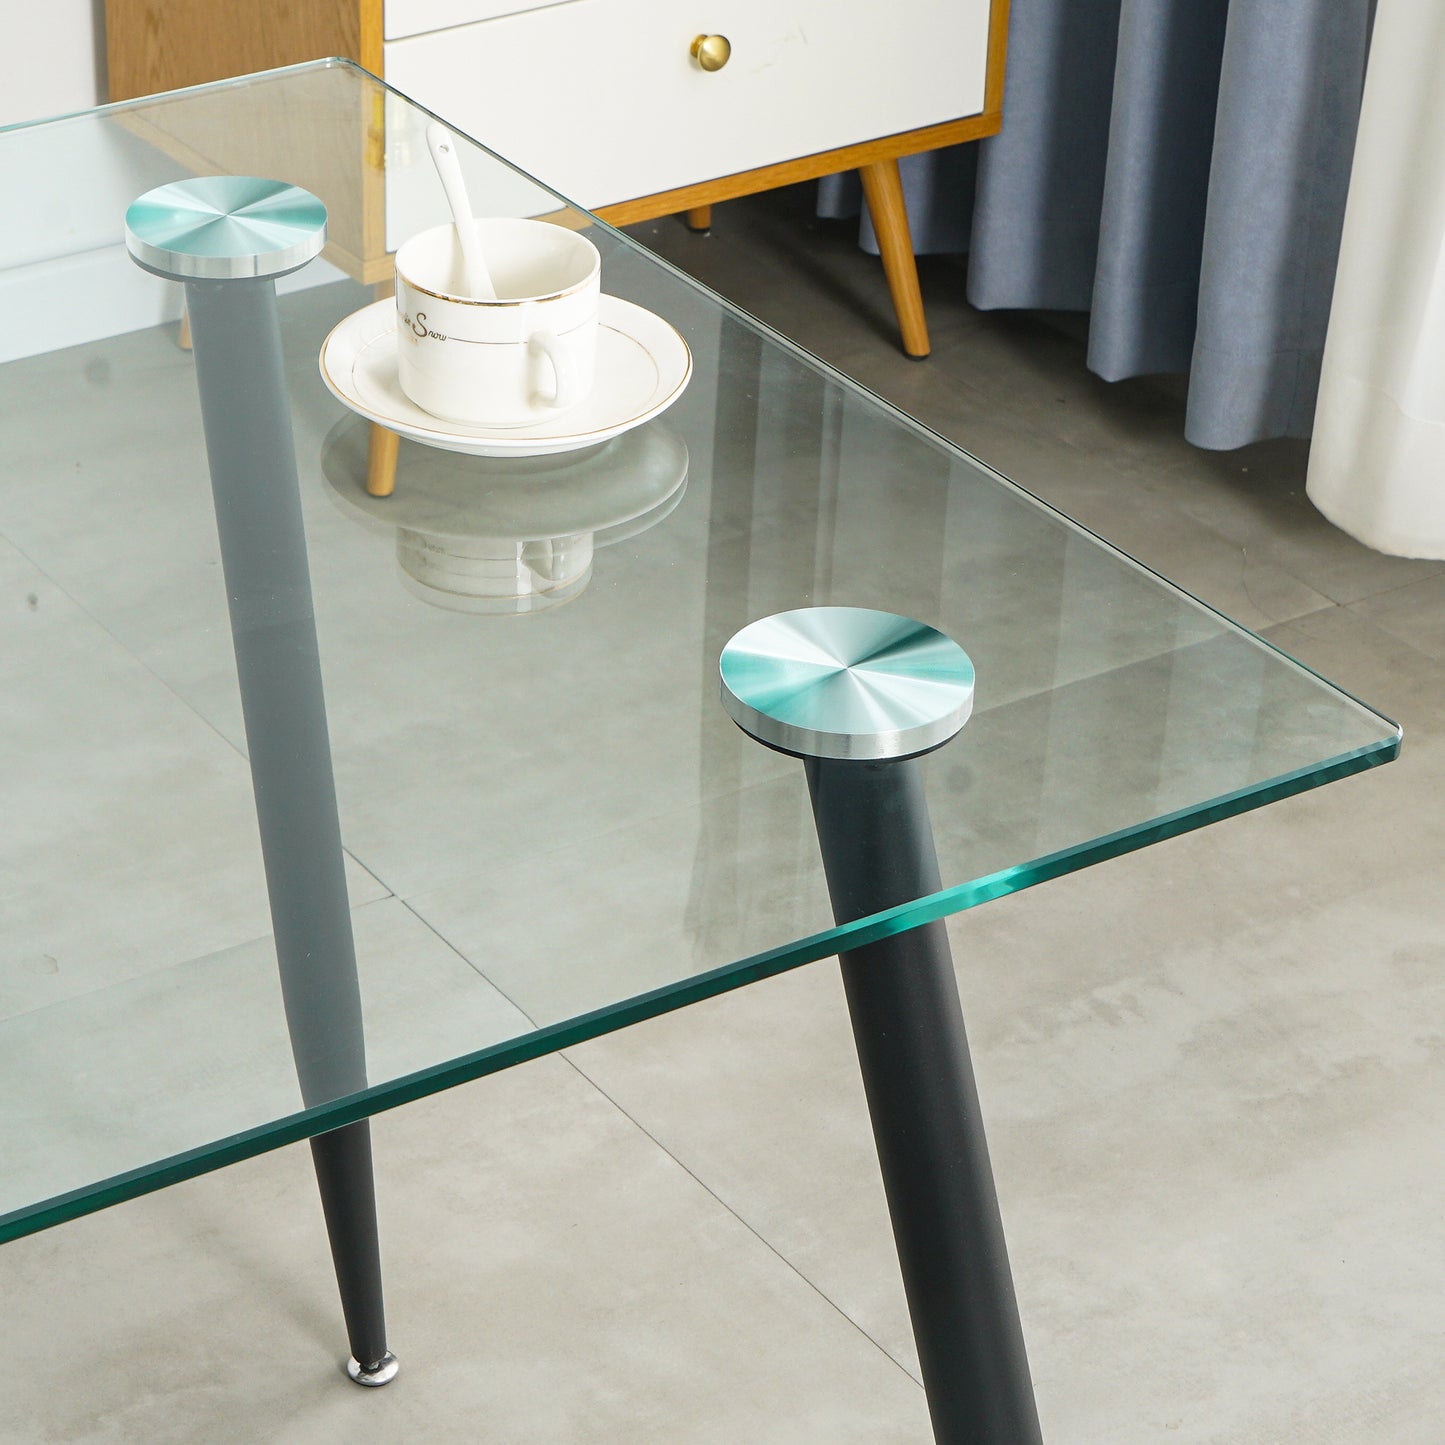 Kitchen Dining Room Table 10mm transparent clear Glass Black powder coated Metal legs